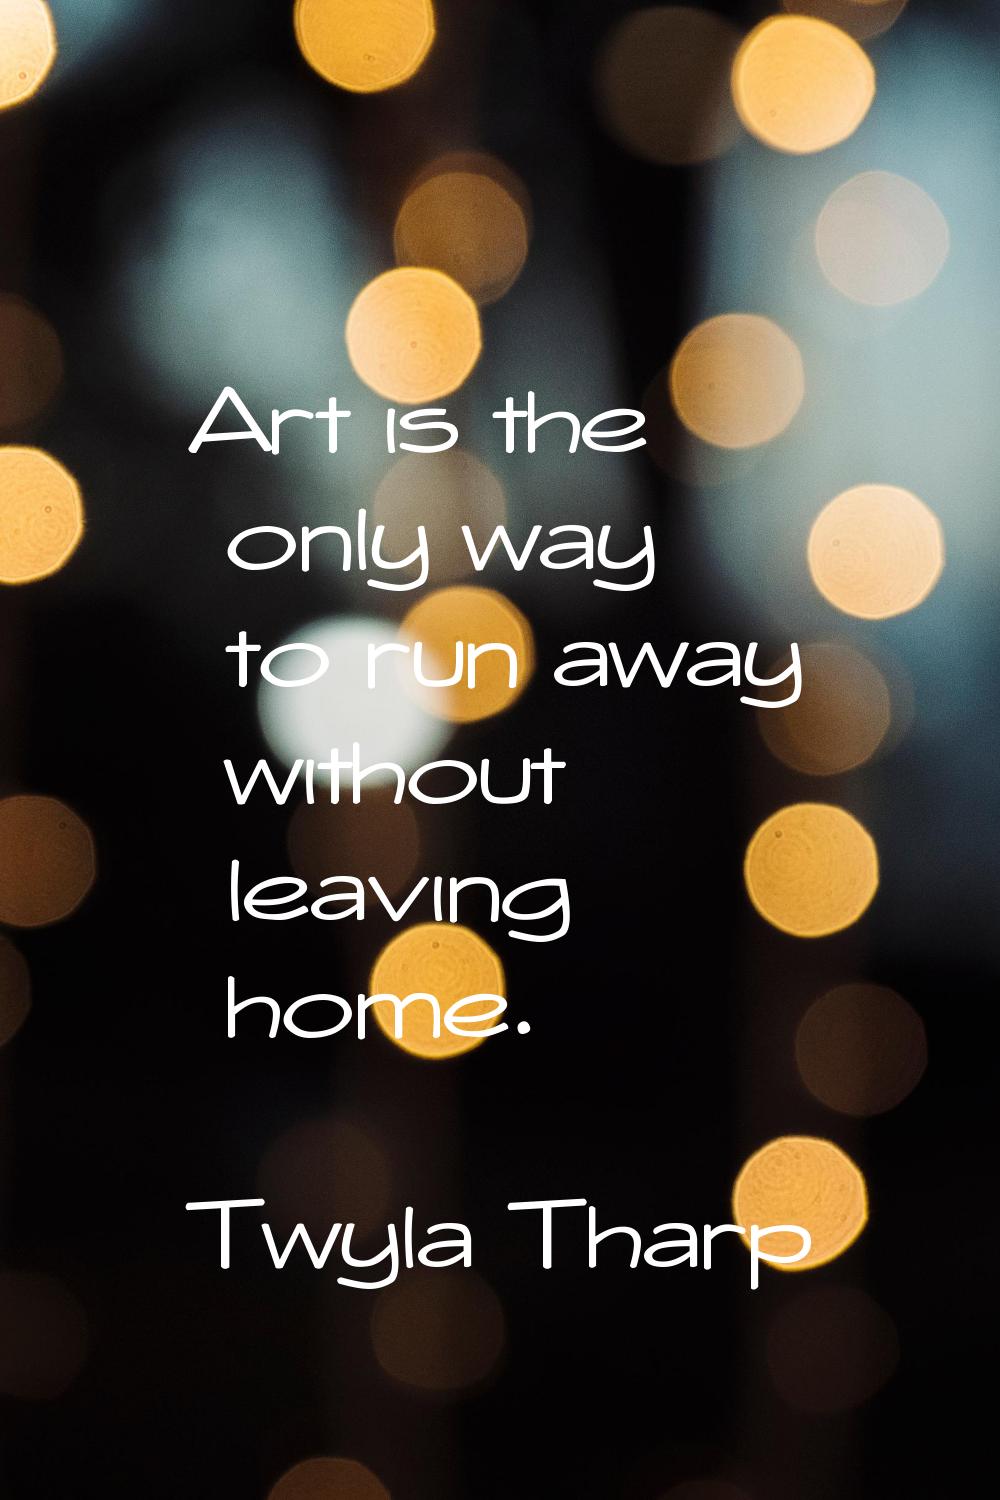 Art is the only way to run away without leaving home.